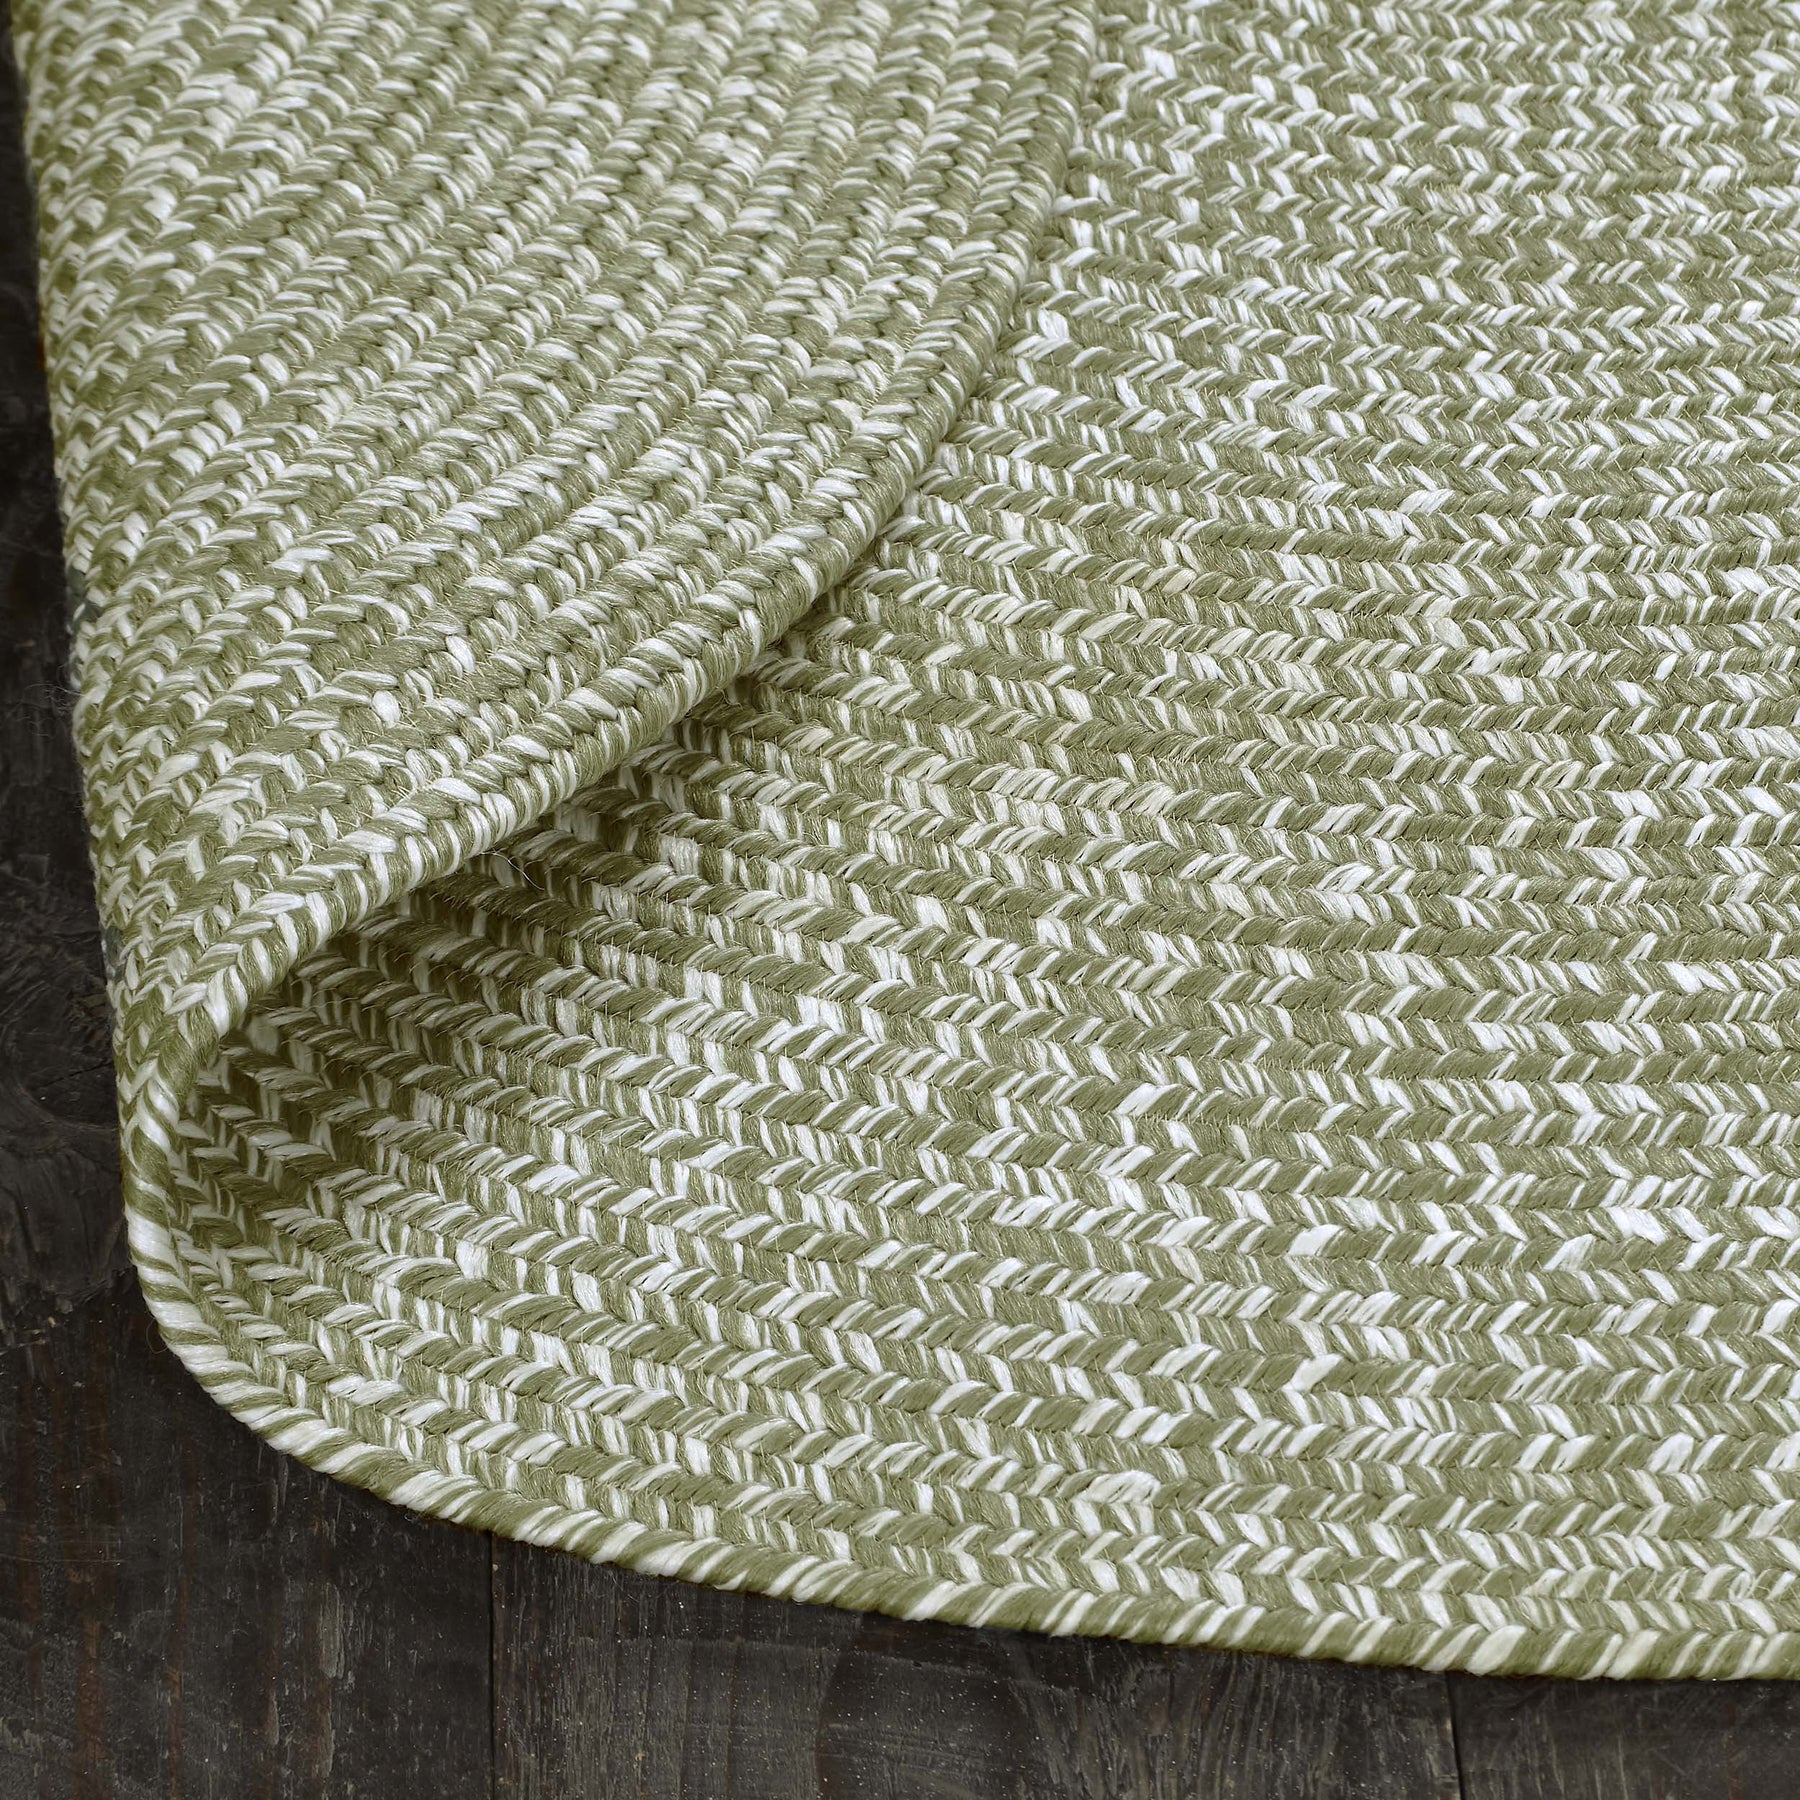 Reversible Braided Eco-Friendly Area Rug Indoor Outdoor Rugs - FogGreenWhite